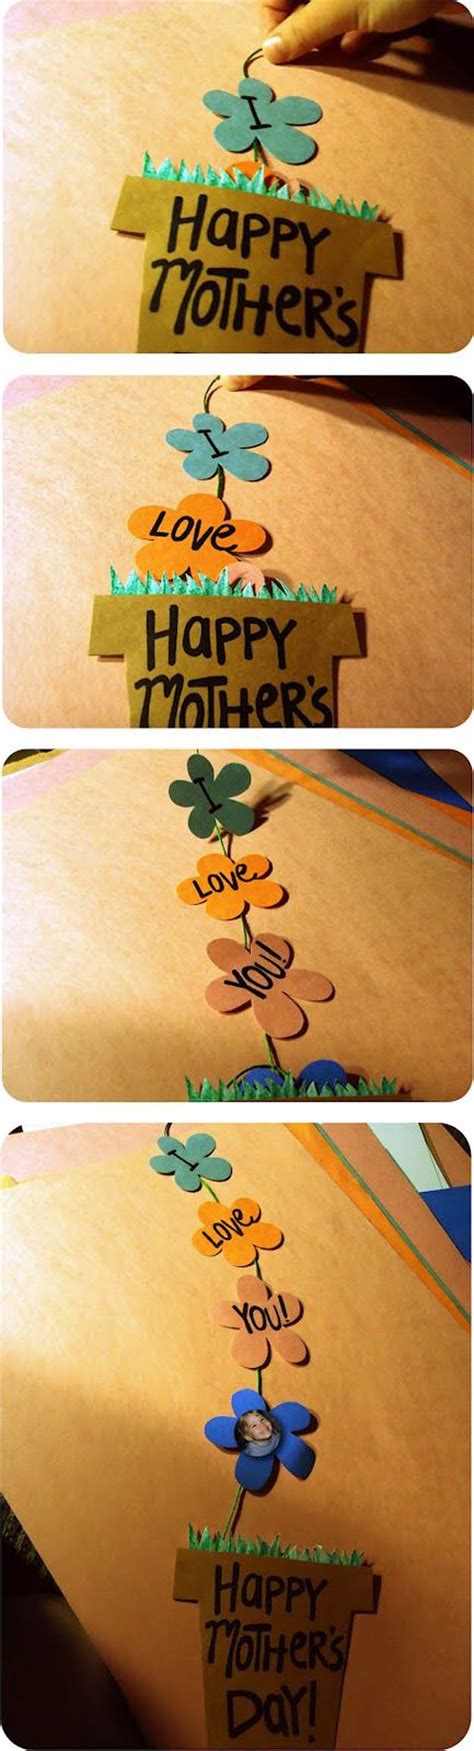 12 homemade mother's day gifts that will melt her heart. 15 Beautiful Handmade Mother's Day Cards | DIY Ready